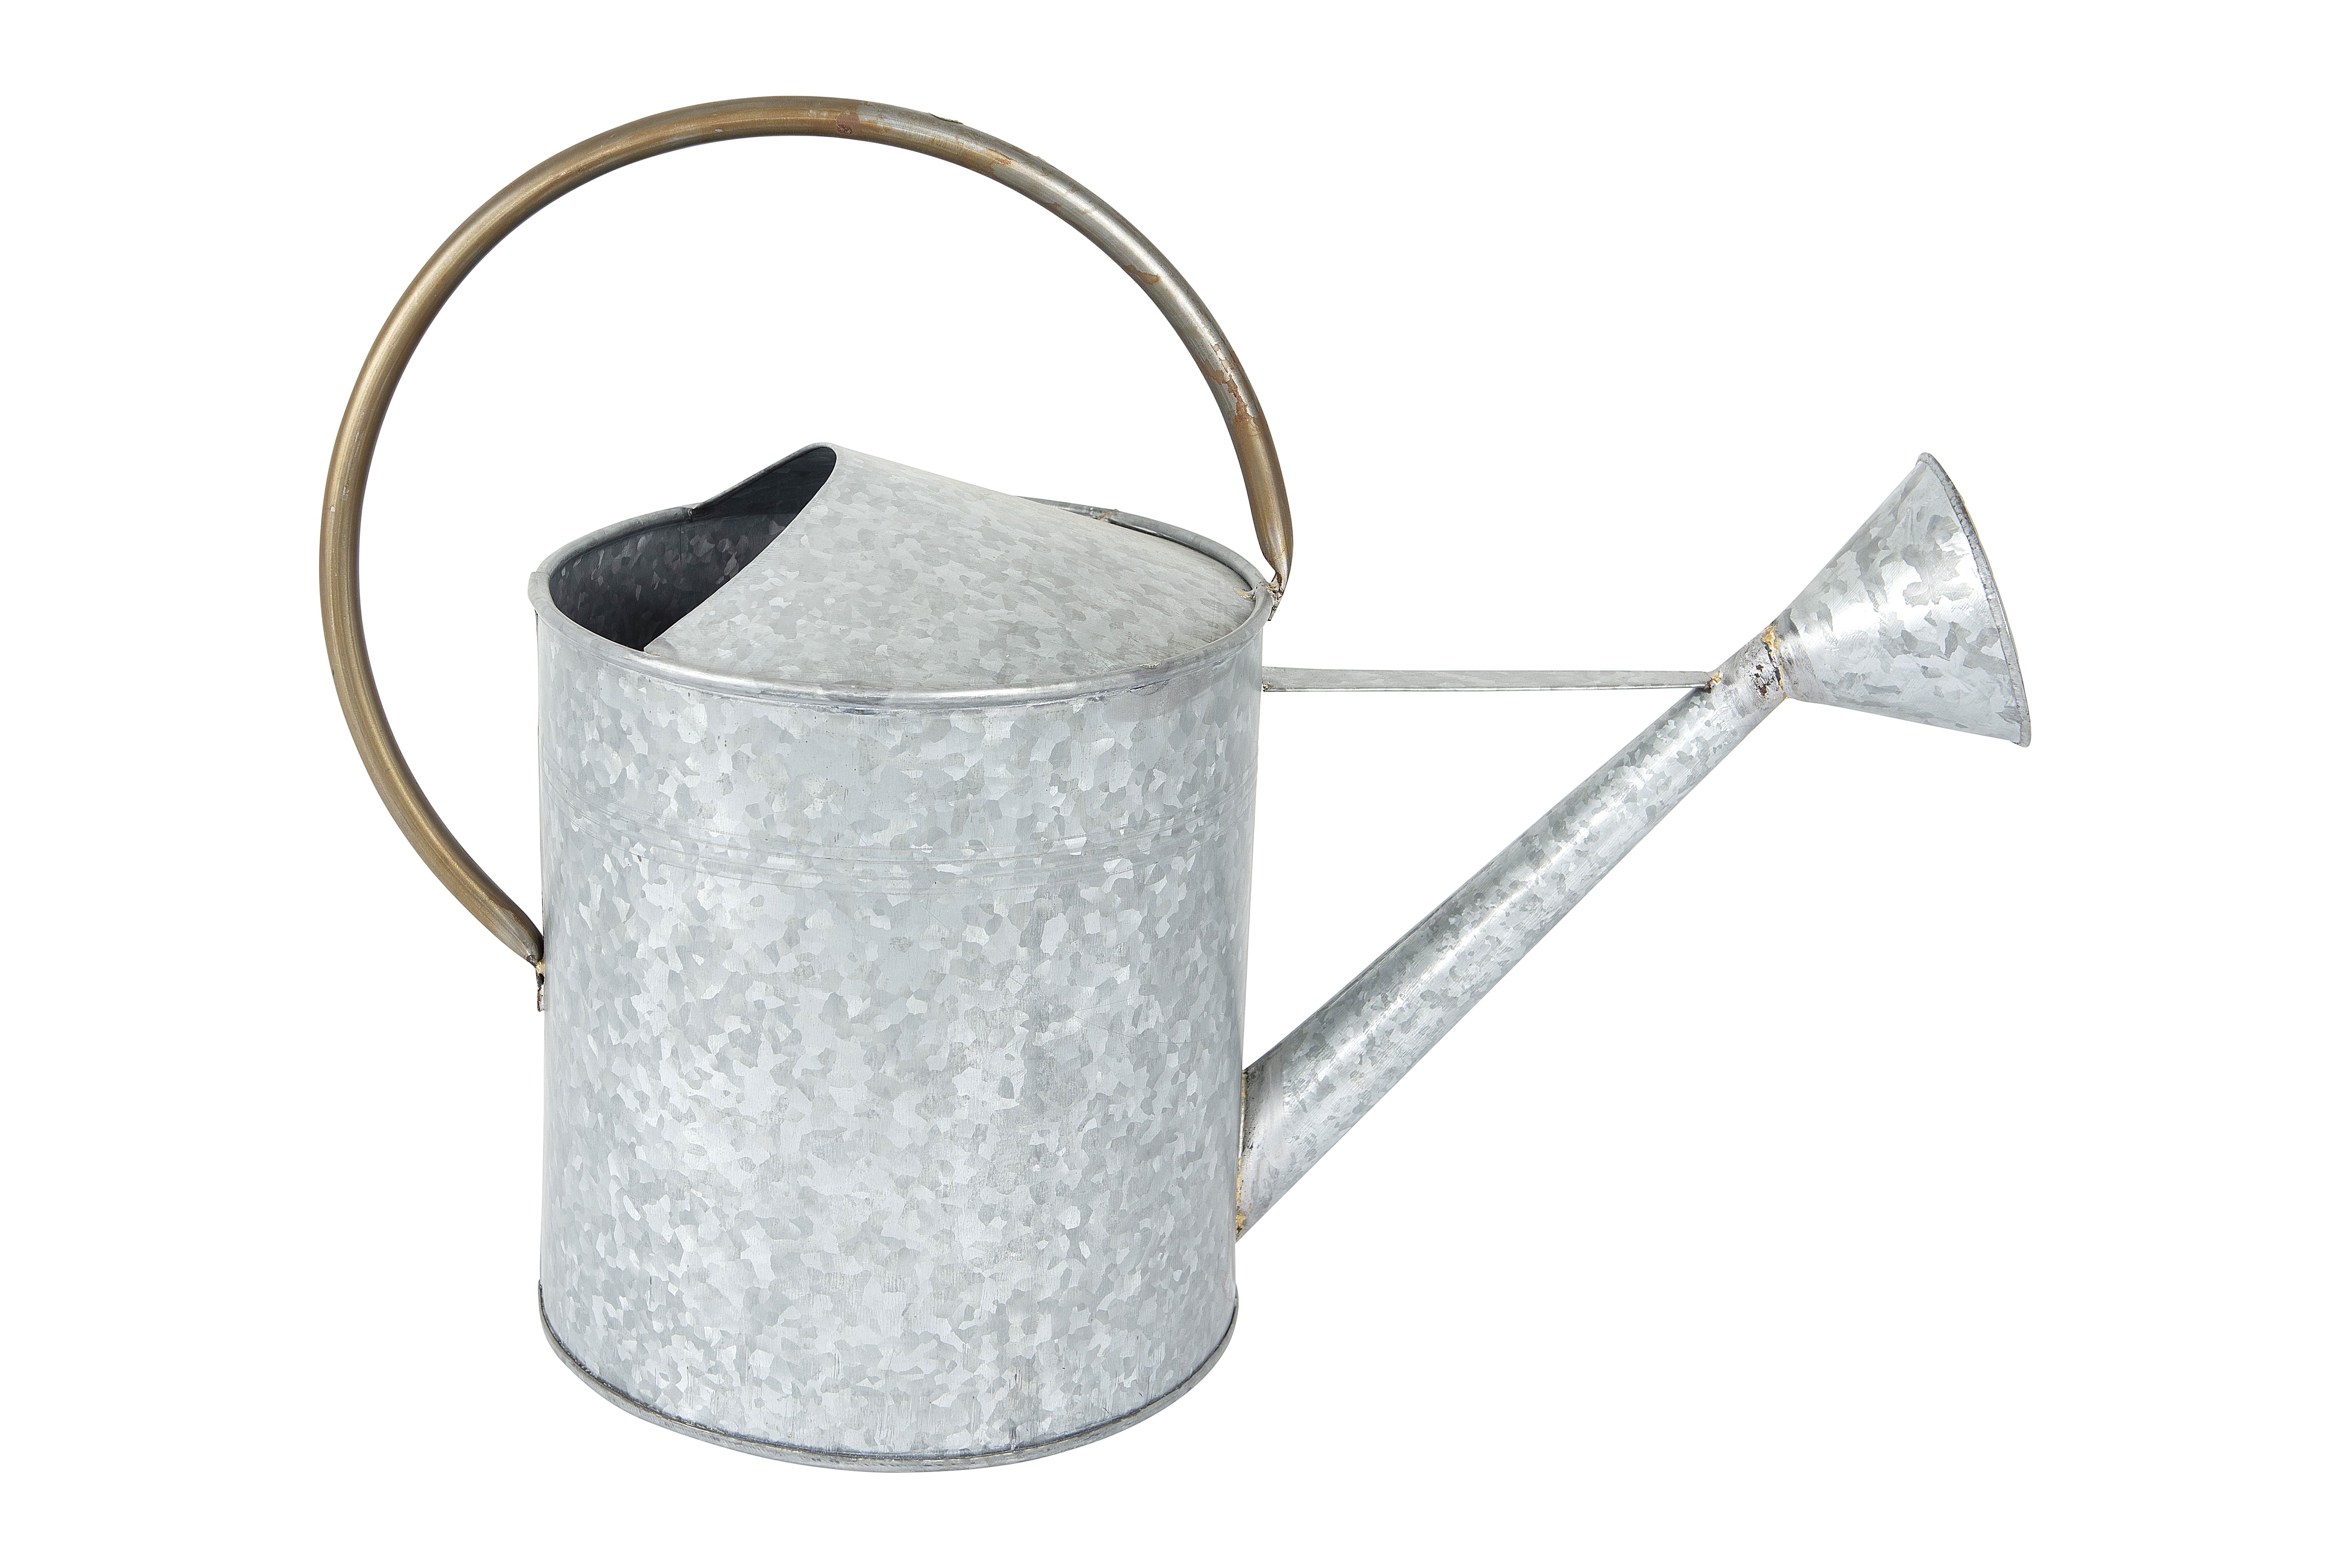 Galvanized watering can is functional and a beautiful ornament in the summer garden! #galvanized #wateringcan #gardening #gardentools